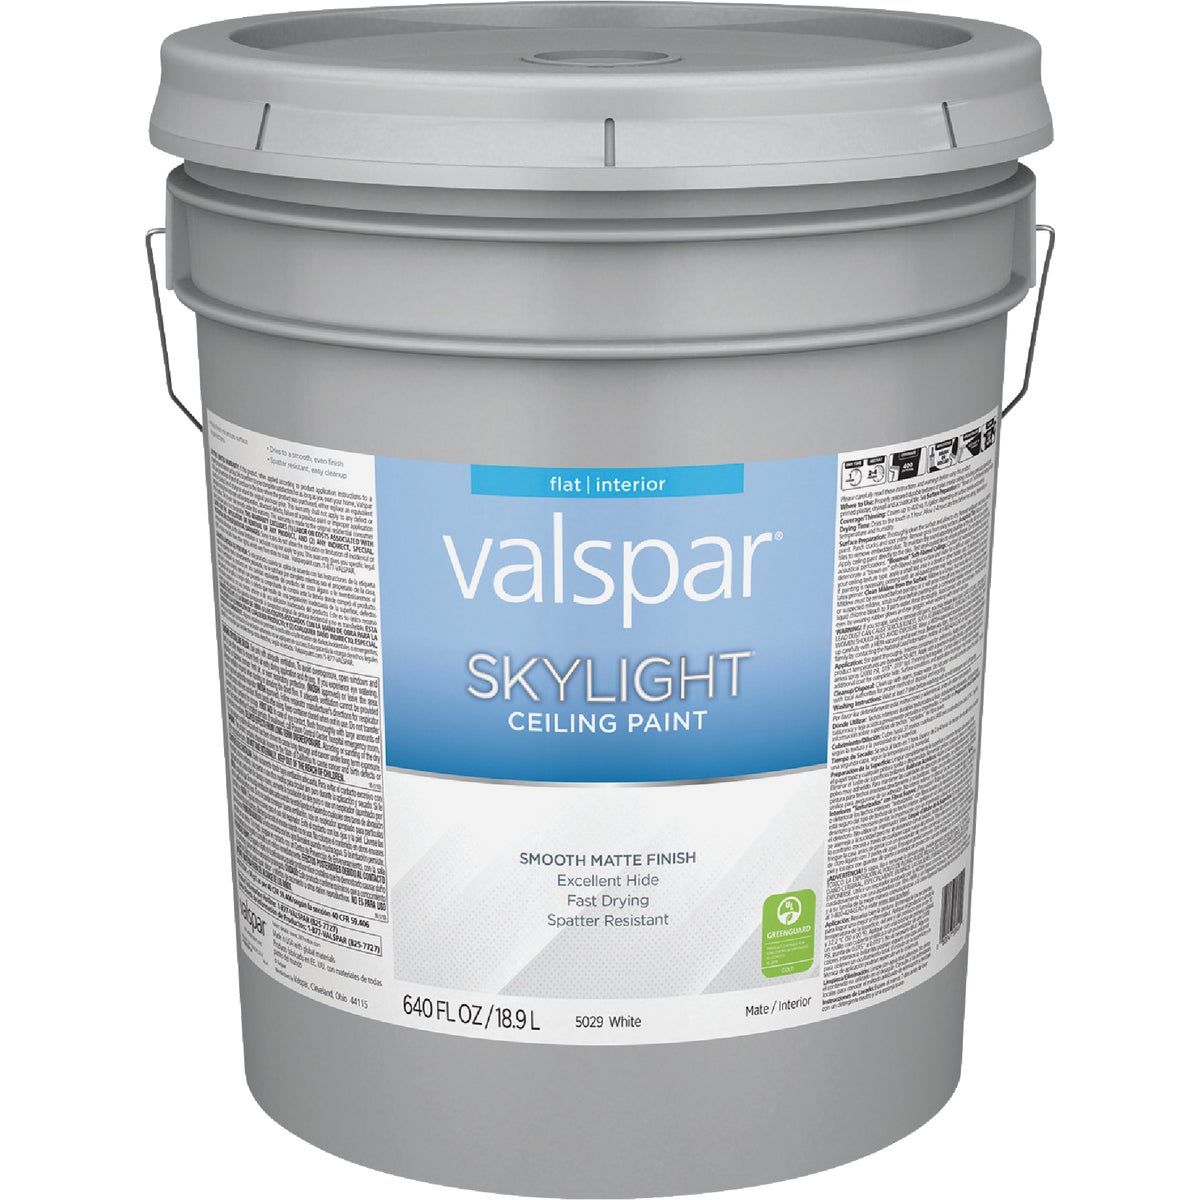 Item 773959, This product is formulated with spatter resistance for ease in overhead 